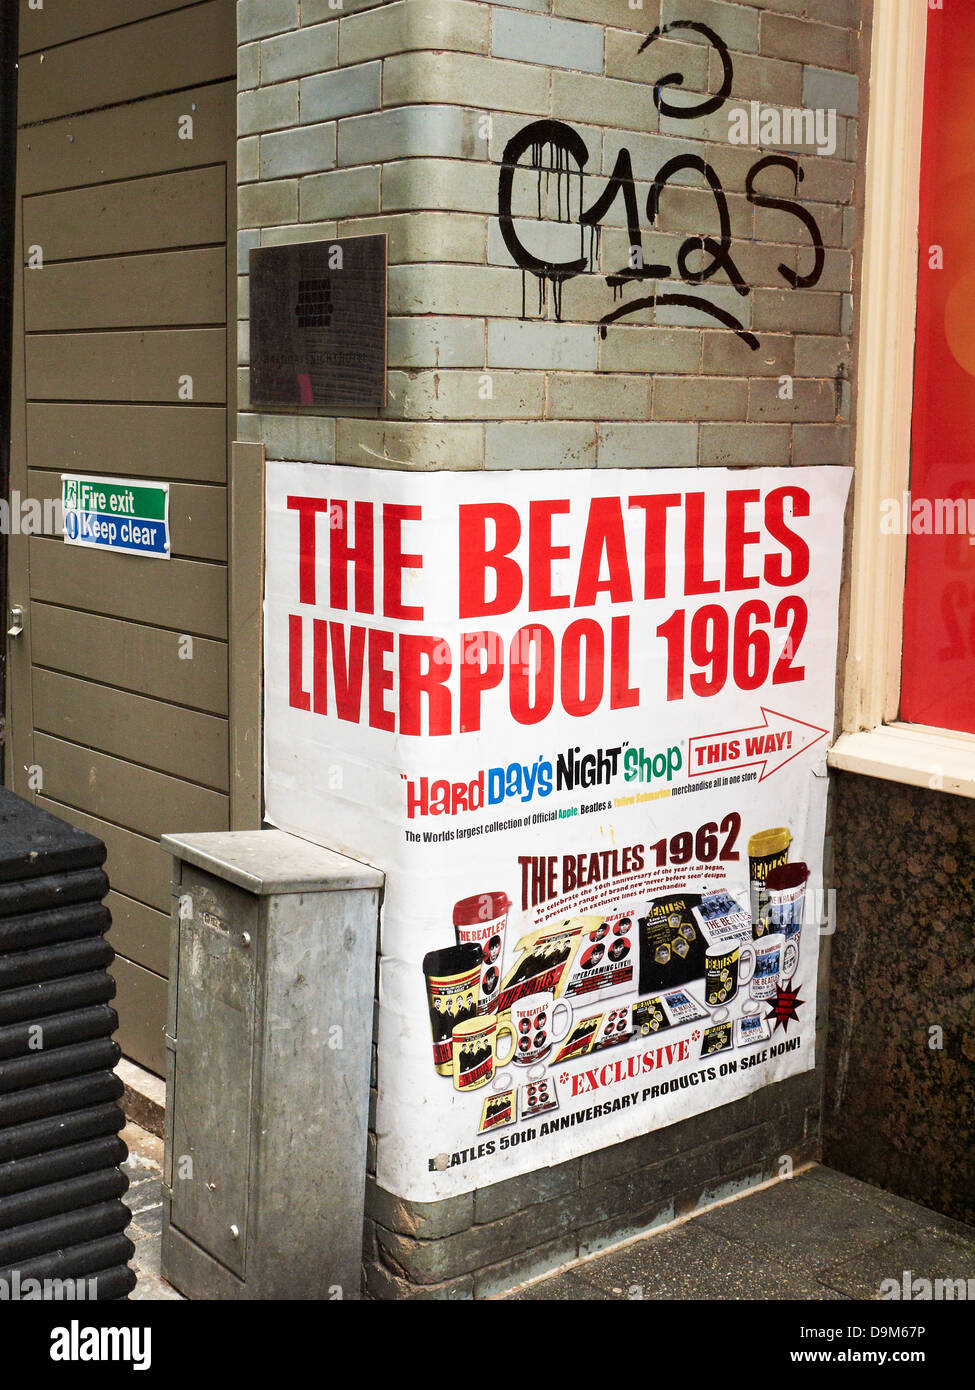 Beatles poster from Hard Days Night Shop in Liverpool UK Stock Photo